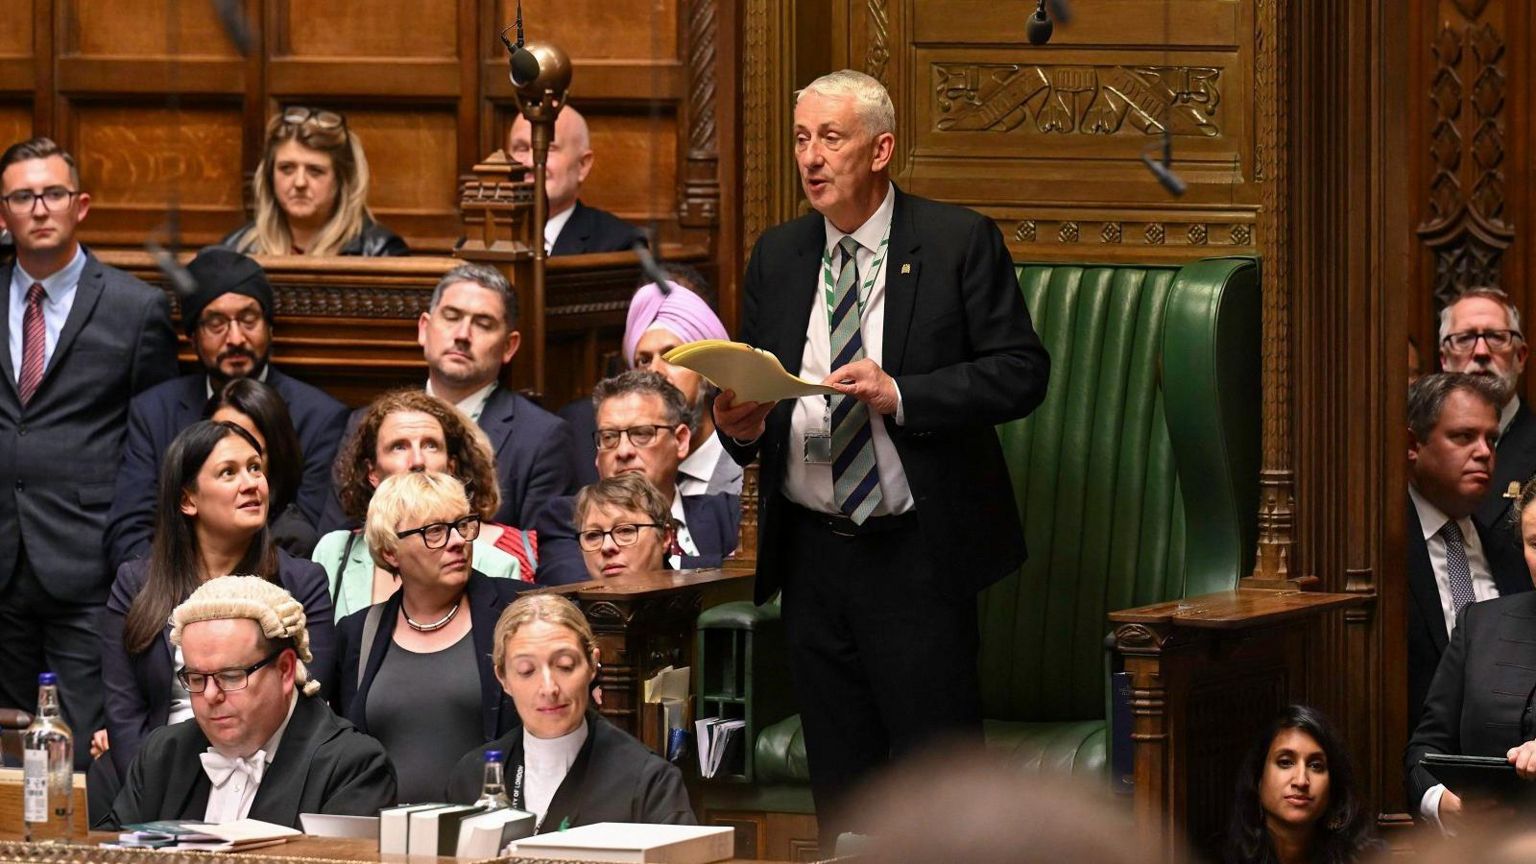 Sir Lindsay Hoyle addresses the Commons from the Speaker's chair